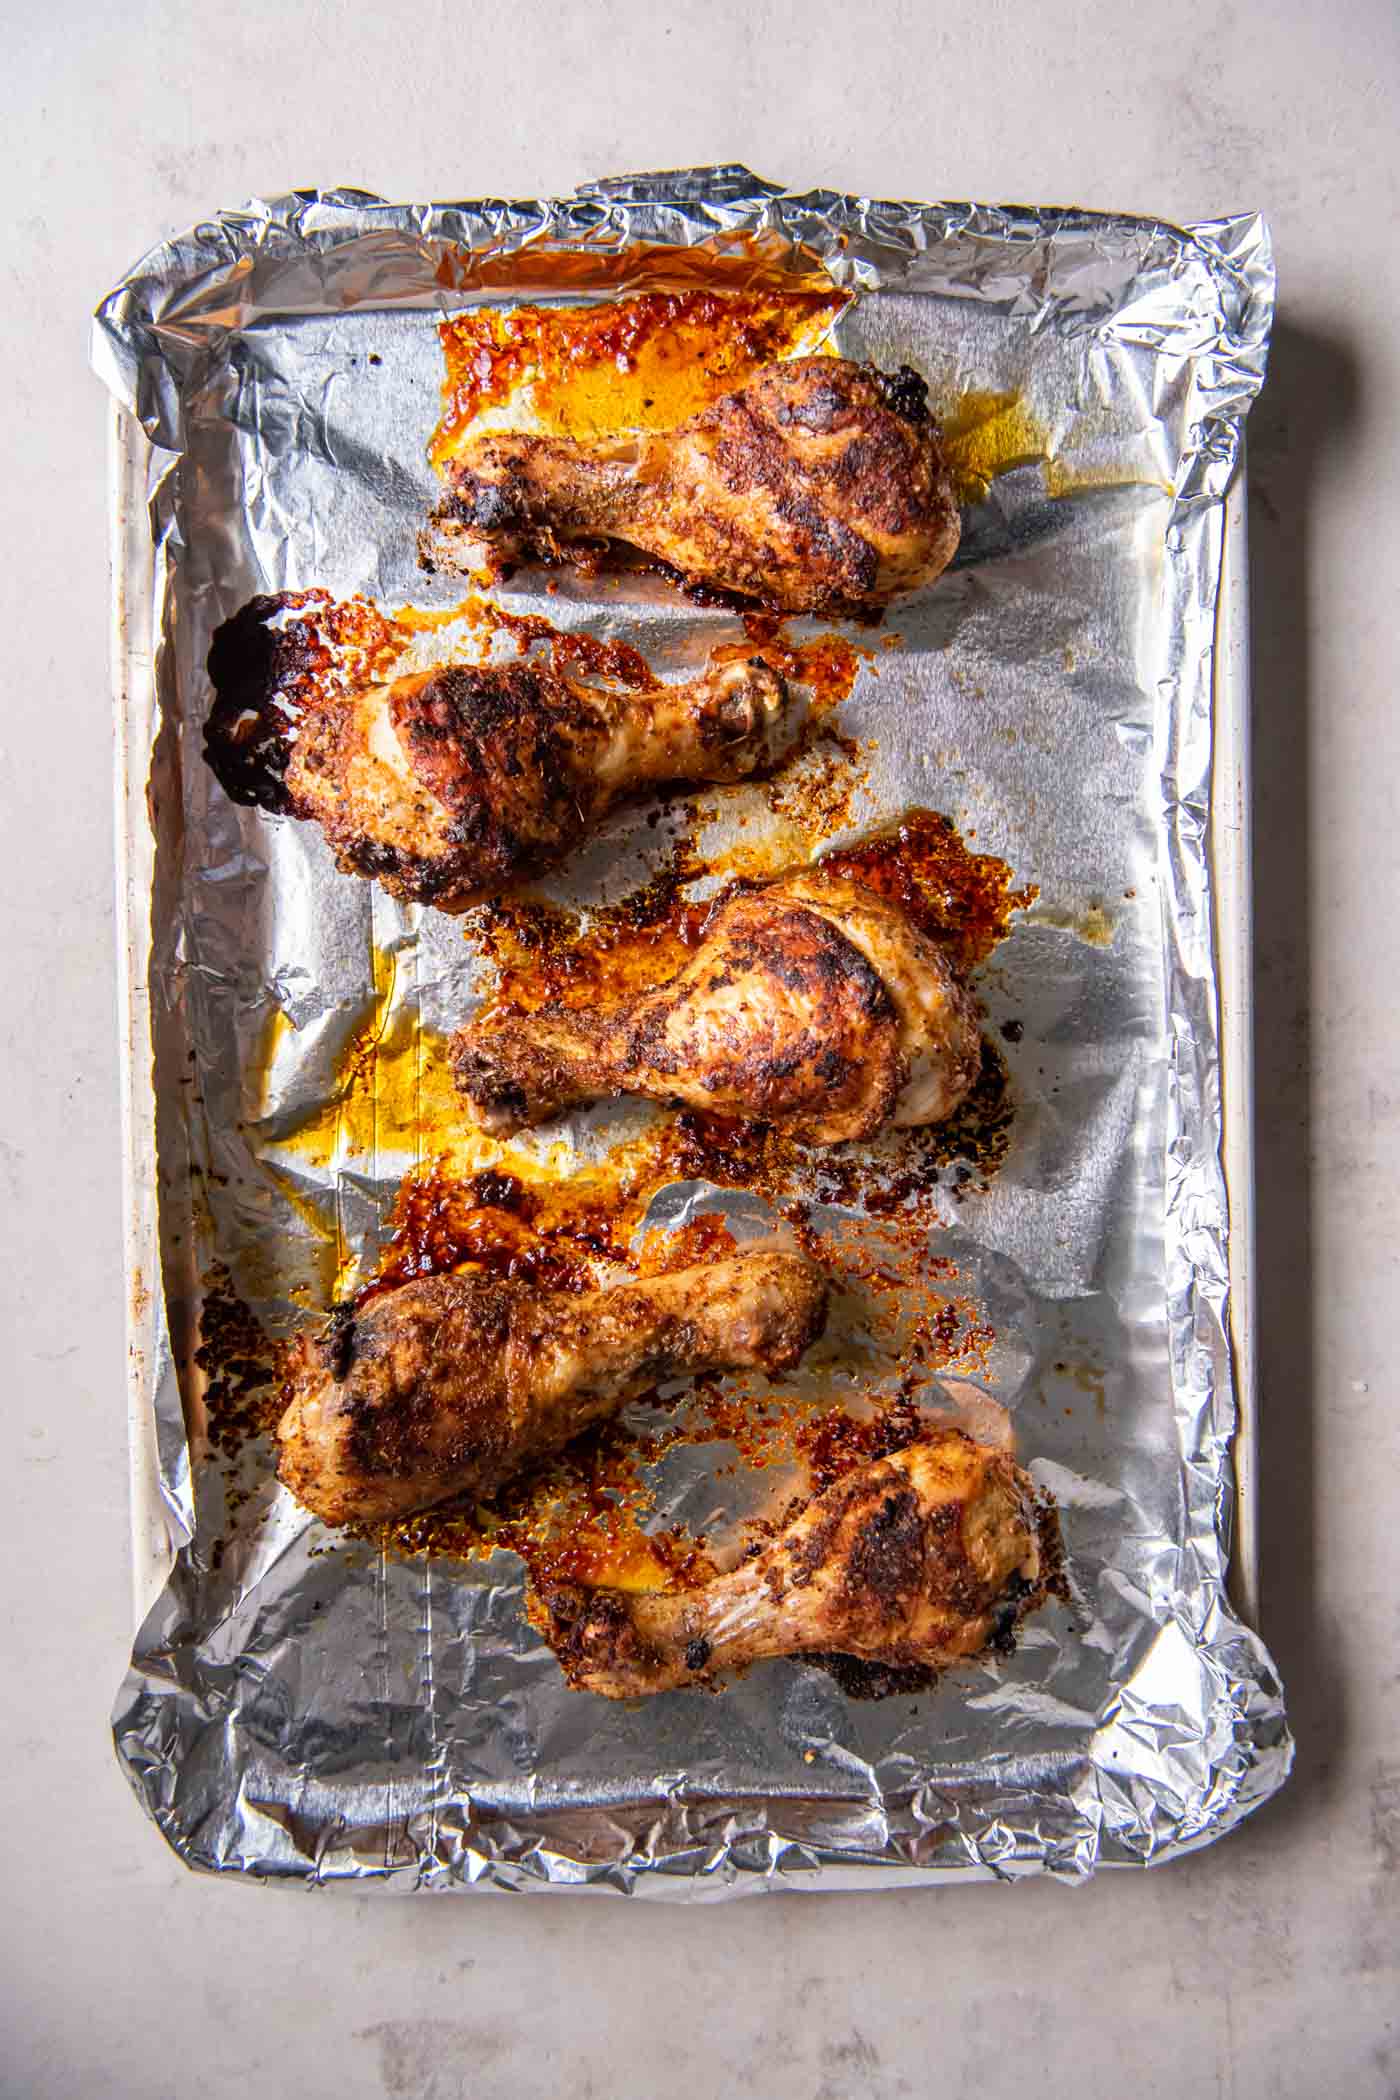 Baked chicken legs on a foil lined baking sheet.